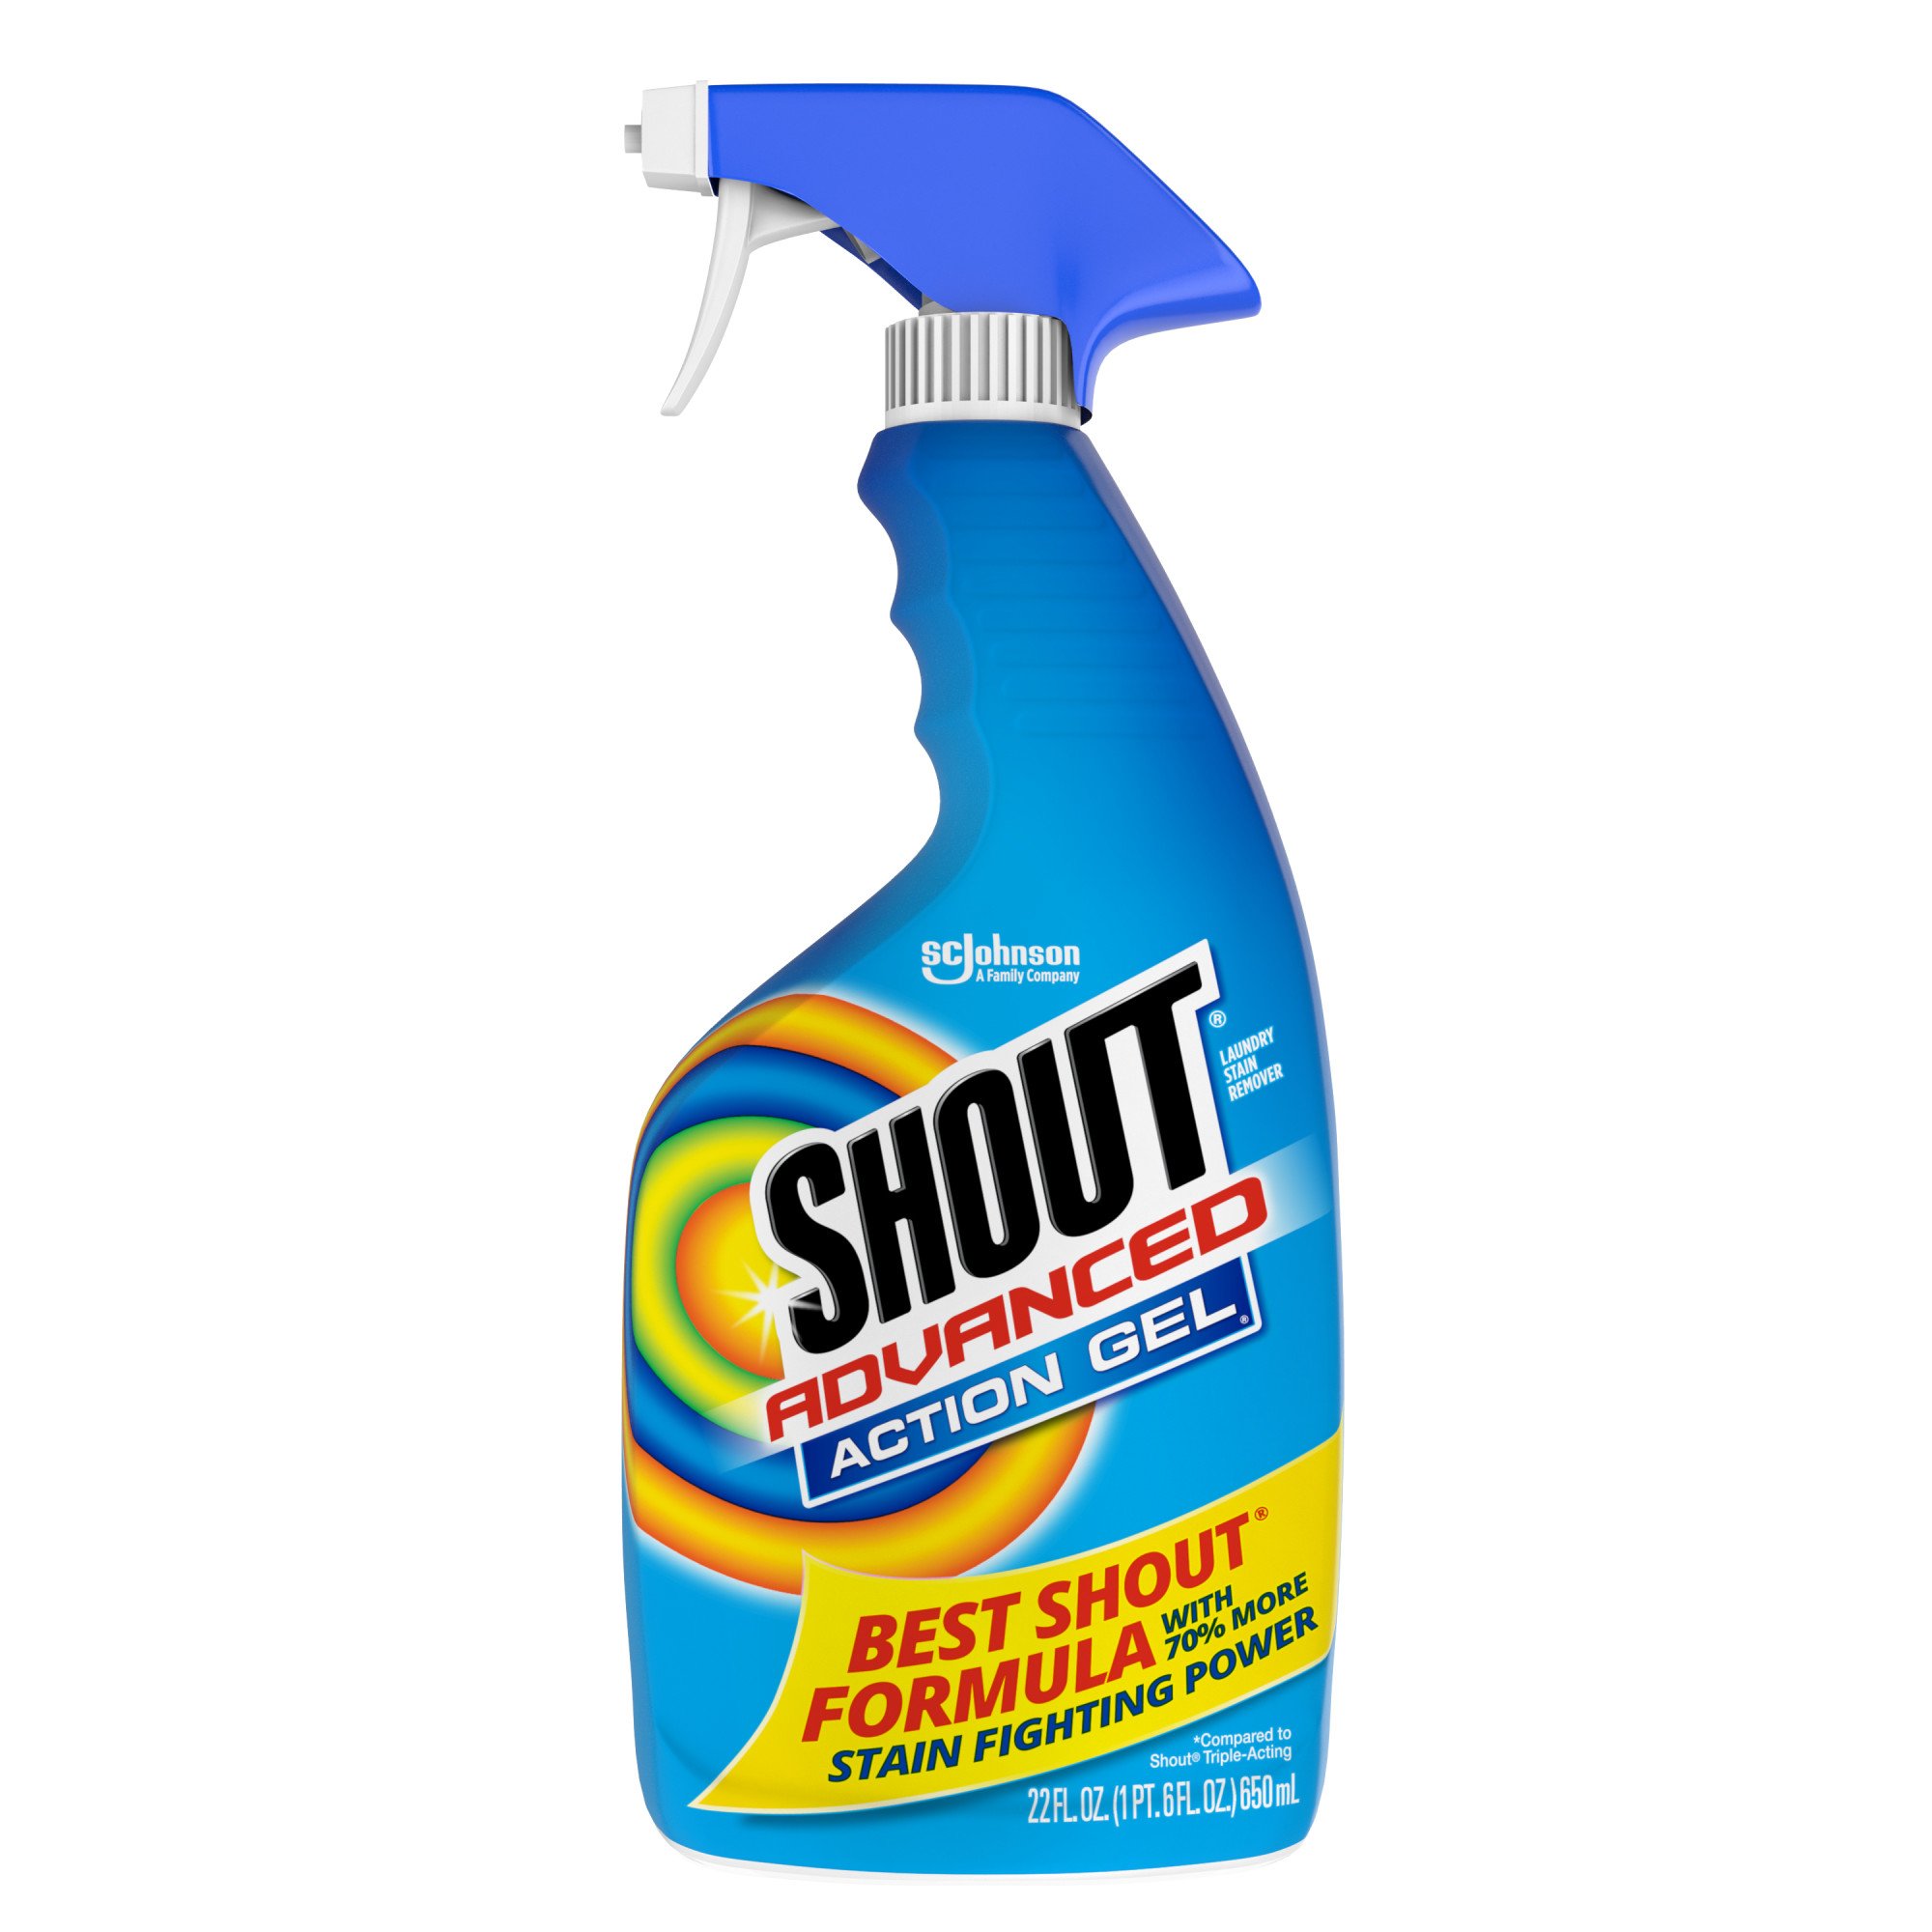 Shout Triple-Acting Laundry Stain Remover - Shop Stain Removers at H-E-B